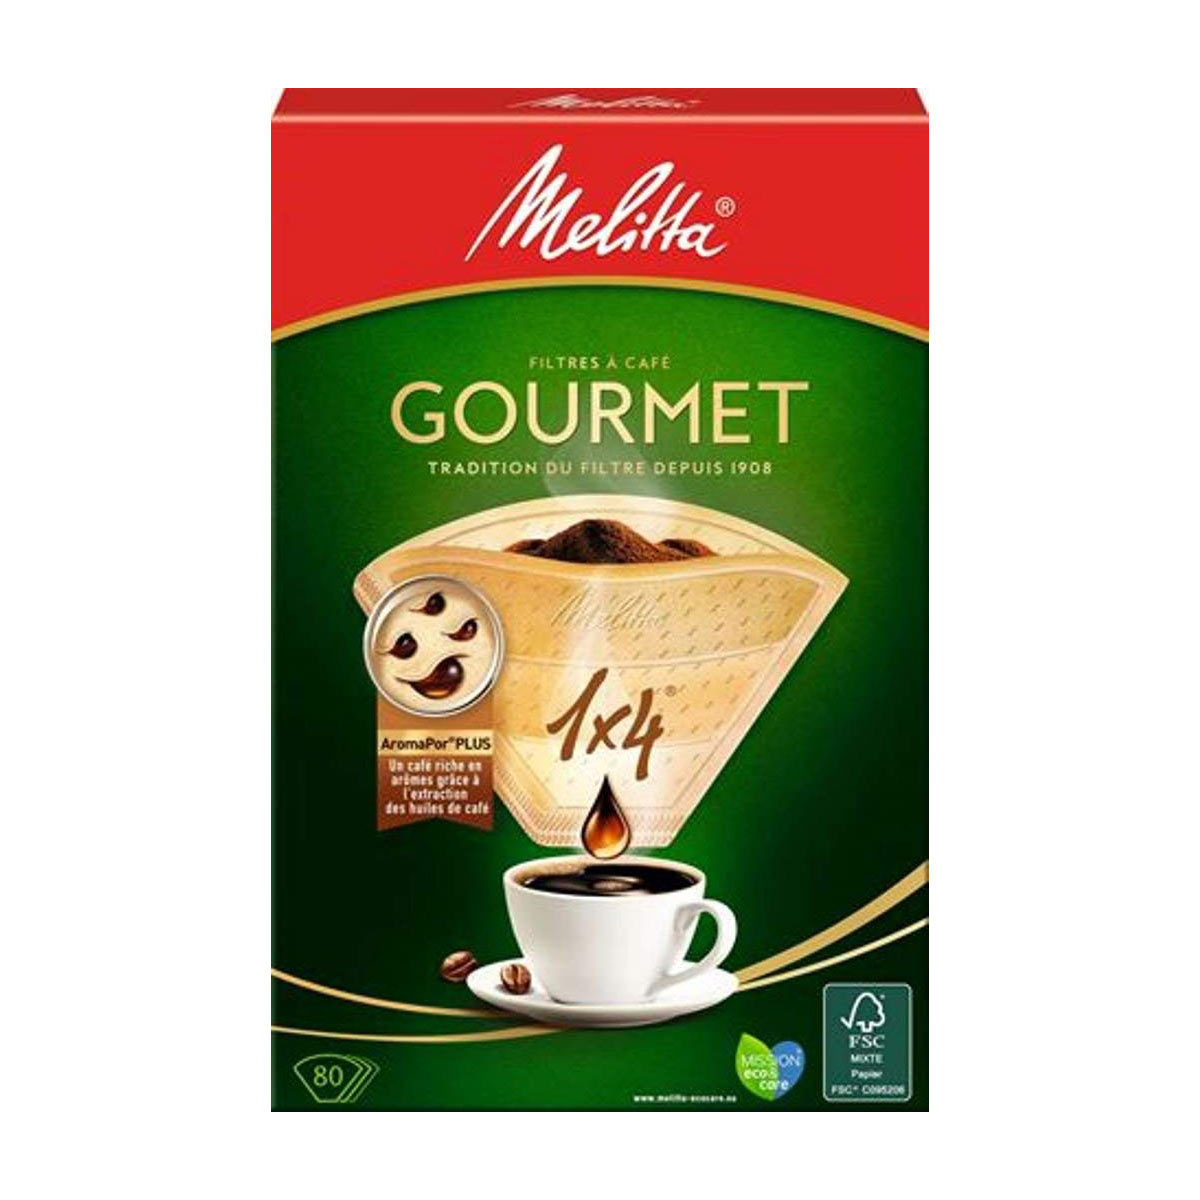 Melitta Gourmet Coffee Filter Papers Size 1x4, 8 x 80 Filters